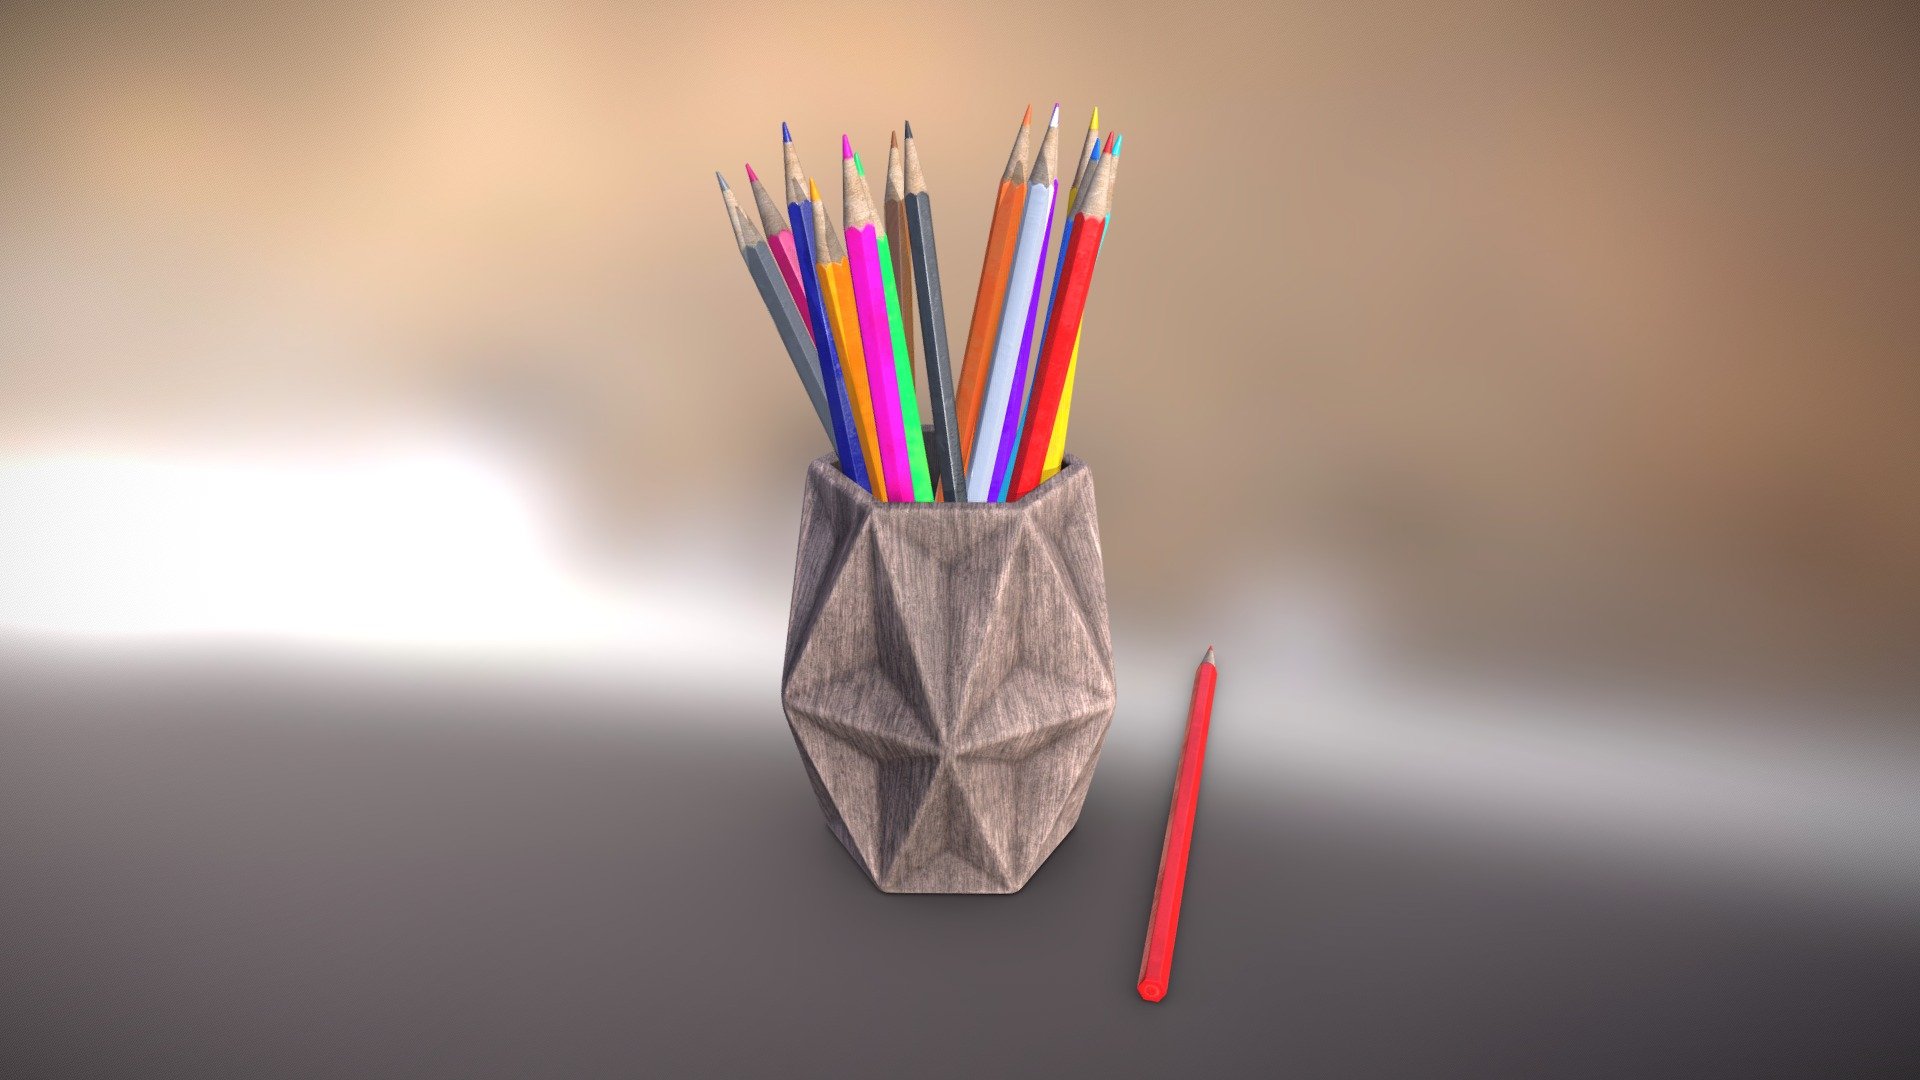 3d model is low poly and game-ready.

Real scale - Units: cm - Pencil ~ 17.1 x 0.7 x 0.6 cm. Holder ~ 10.6 x 9.37 x 8.22 cm.

Formats:




.blend (Mesh + material (Principled BSDF) + Textures PBR - Roughness/Metallic) - Blender (ver. 2.92.0).

.tbscene (Mesh + Textures PBR) - Marmoset Toolbag 3 (Ver 3.08).

.FBX (only mesh without materials) - exported from Blender.

.obj (Triangulated, only mesh without materials) - exported from Blender.

.glb (Triangulated, Mesh + Textures PBR (compressed in format)) - exported from Marmoset Toolbag 3.

.gltf ( Triangulated, Mesh + Textures PBR - .jpg ) - exported from glTF Tools Visual Studio Code.

.unitypackage (Triangulated, Mesh + Textures - .tga) - exported from Marmoset Toolbag 3 and FBX mesh from Blender.

.FBX for Unity (only mesh without materials, up = Y Up) 3d model